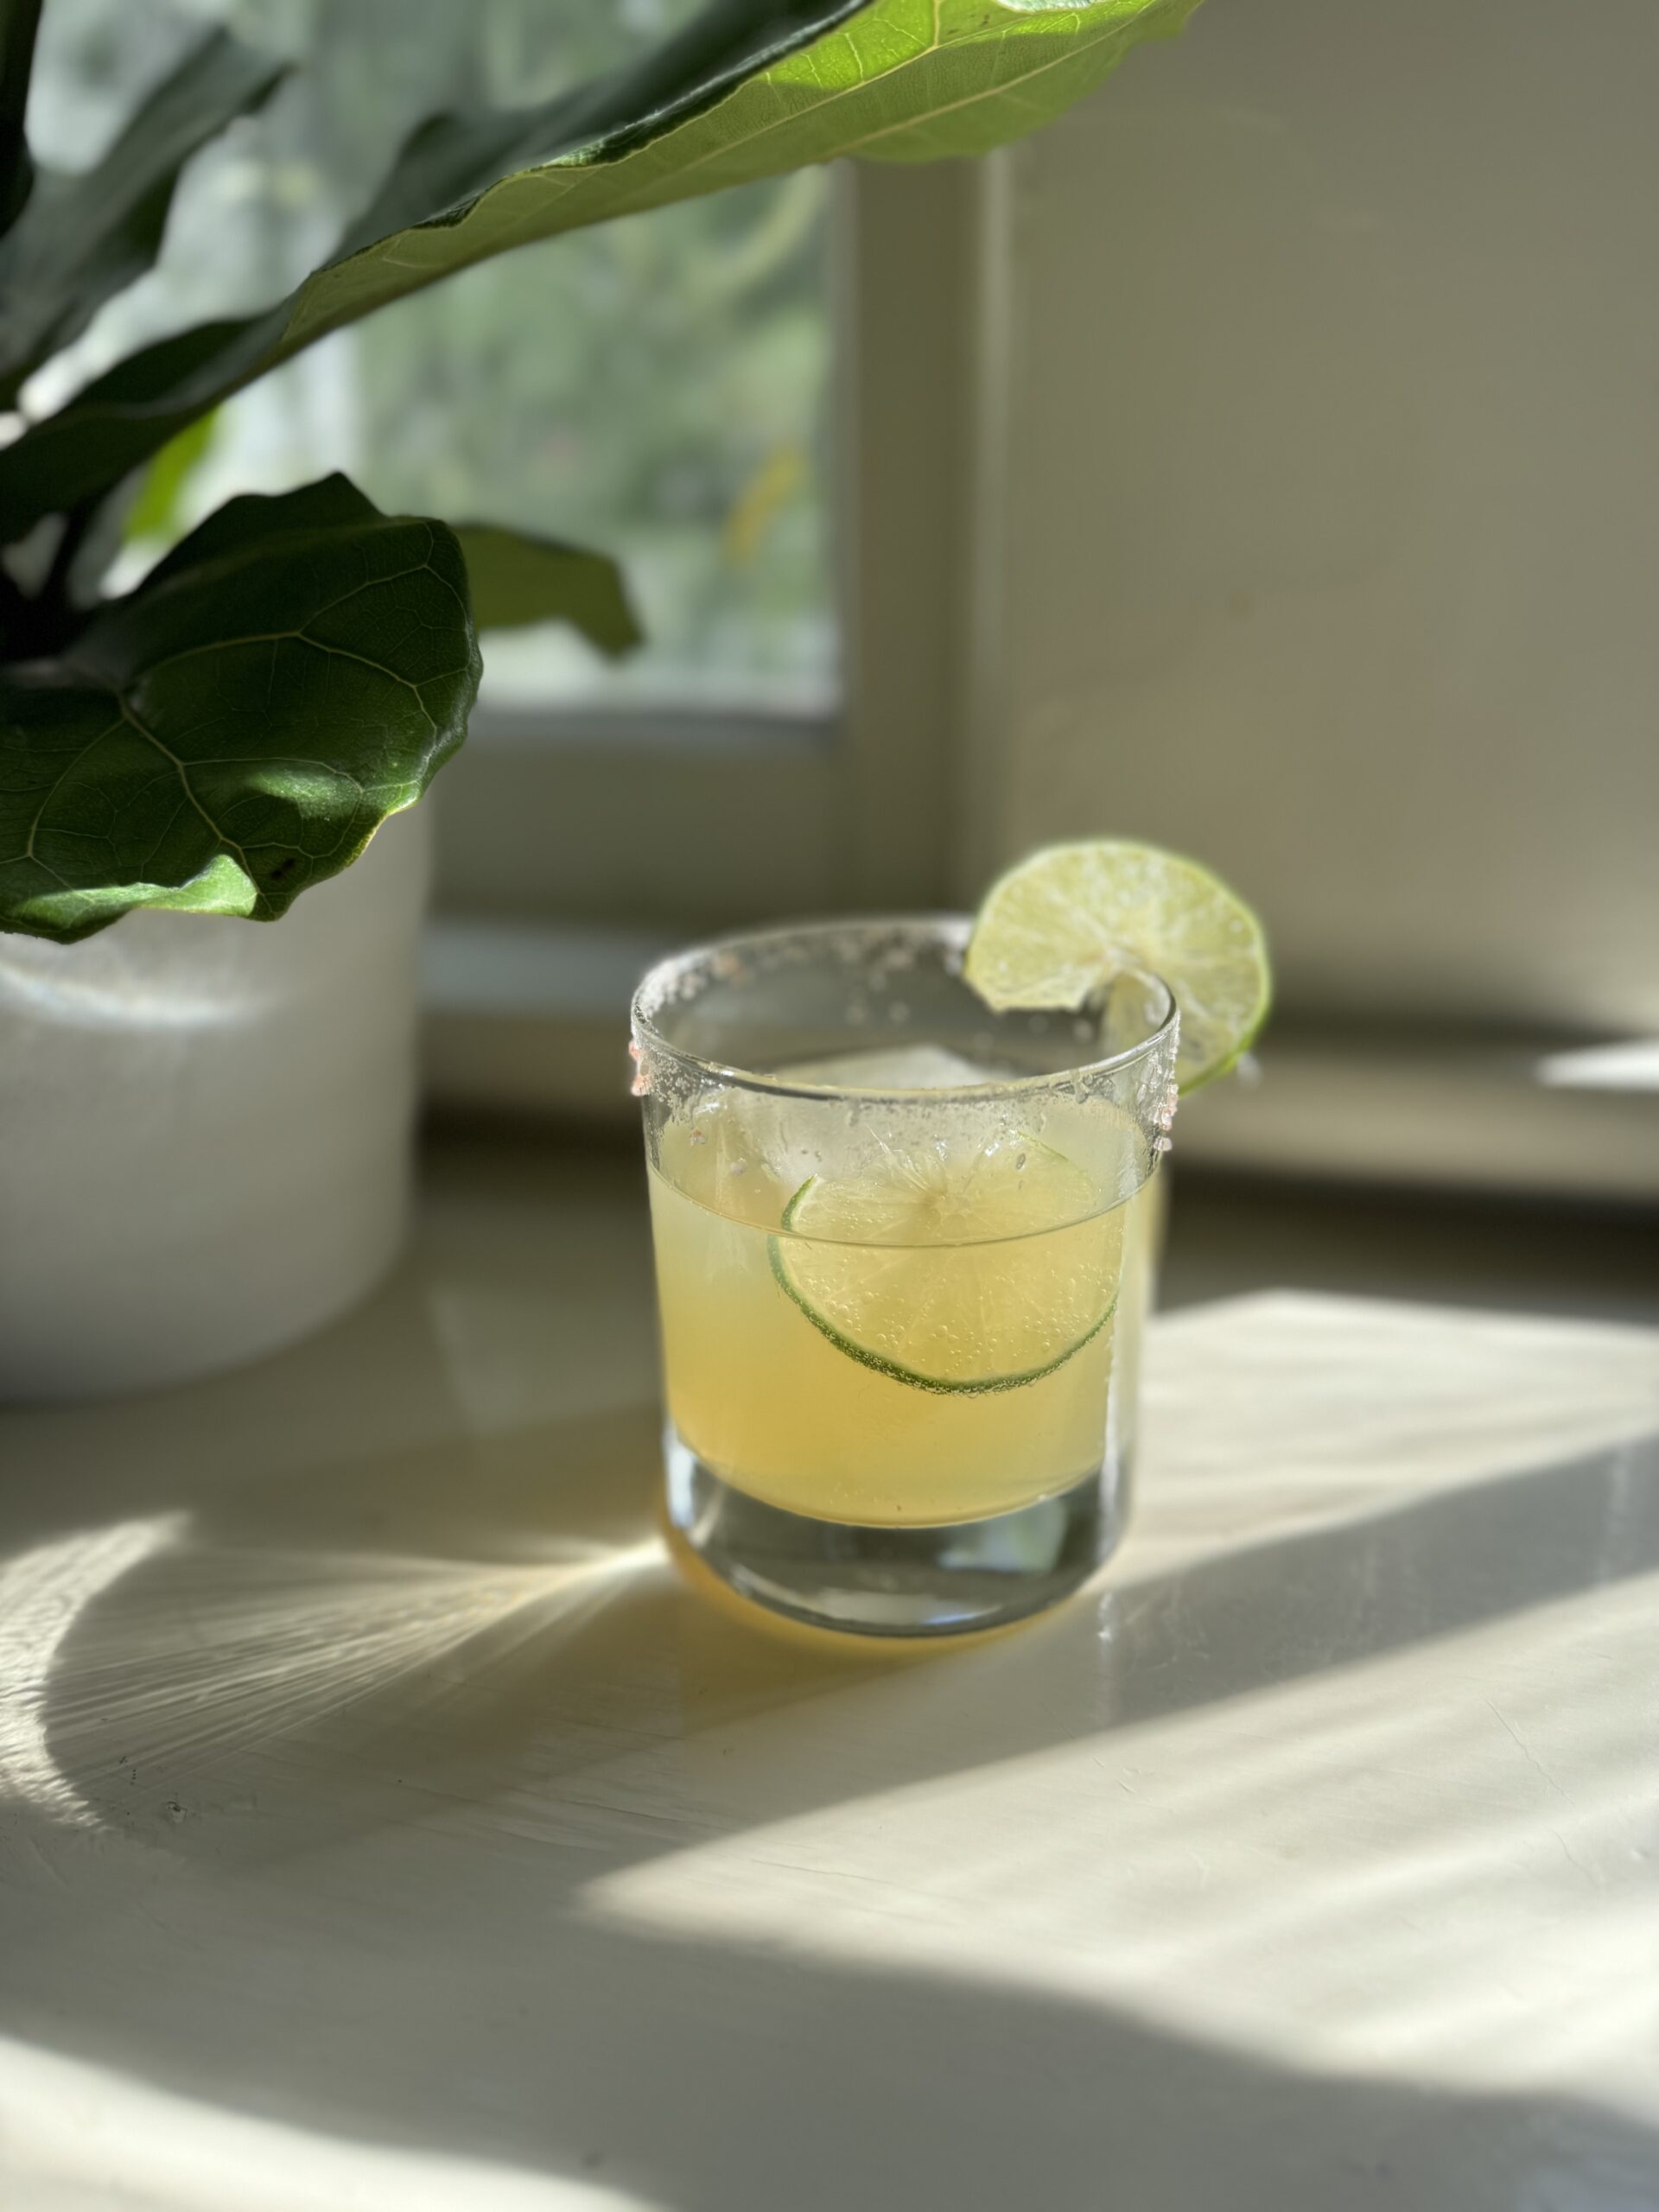 A glass with a light yellow drink, garnished with a lime slice, is placed on a sunlit surface next to a potted plant.